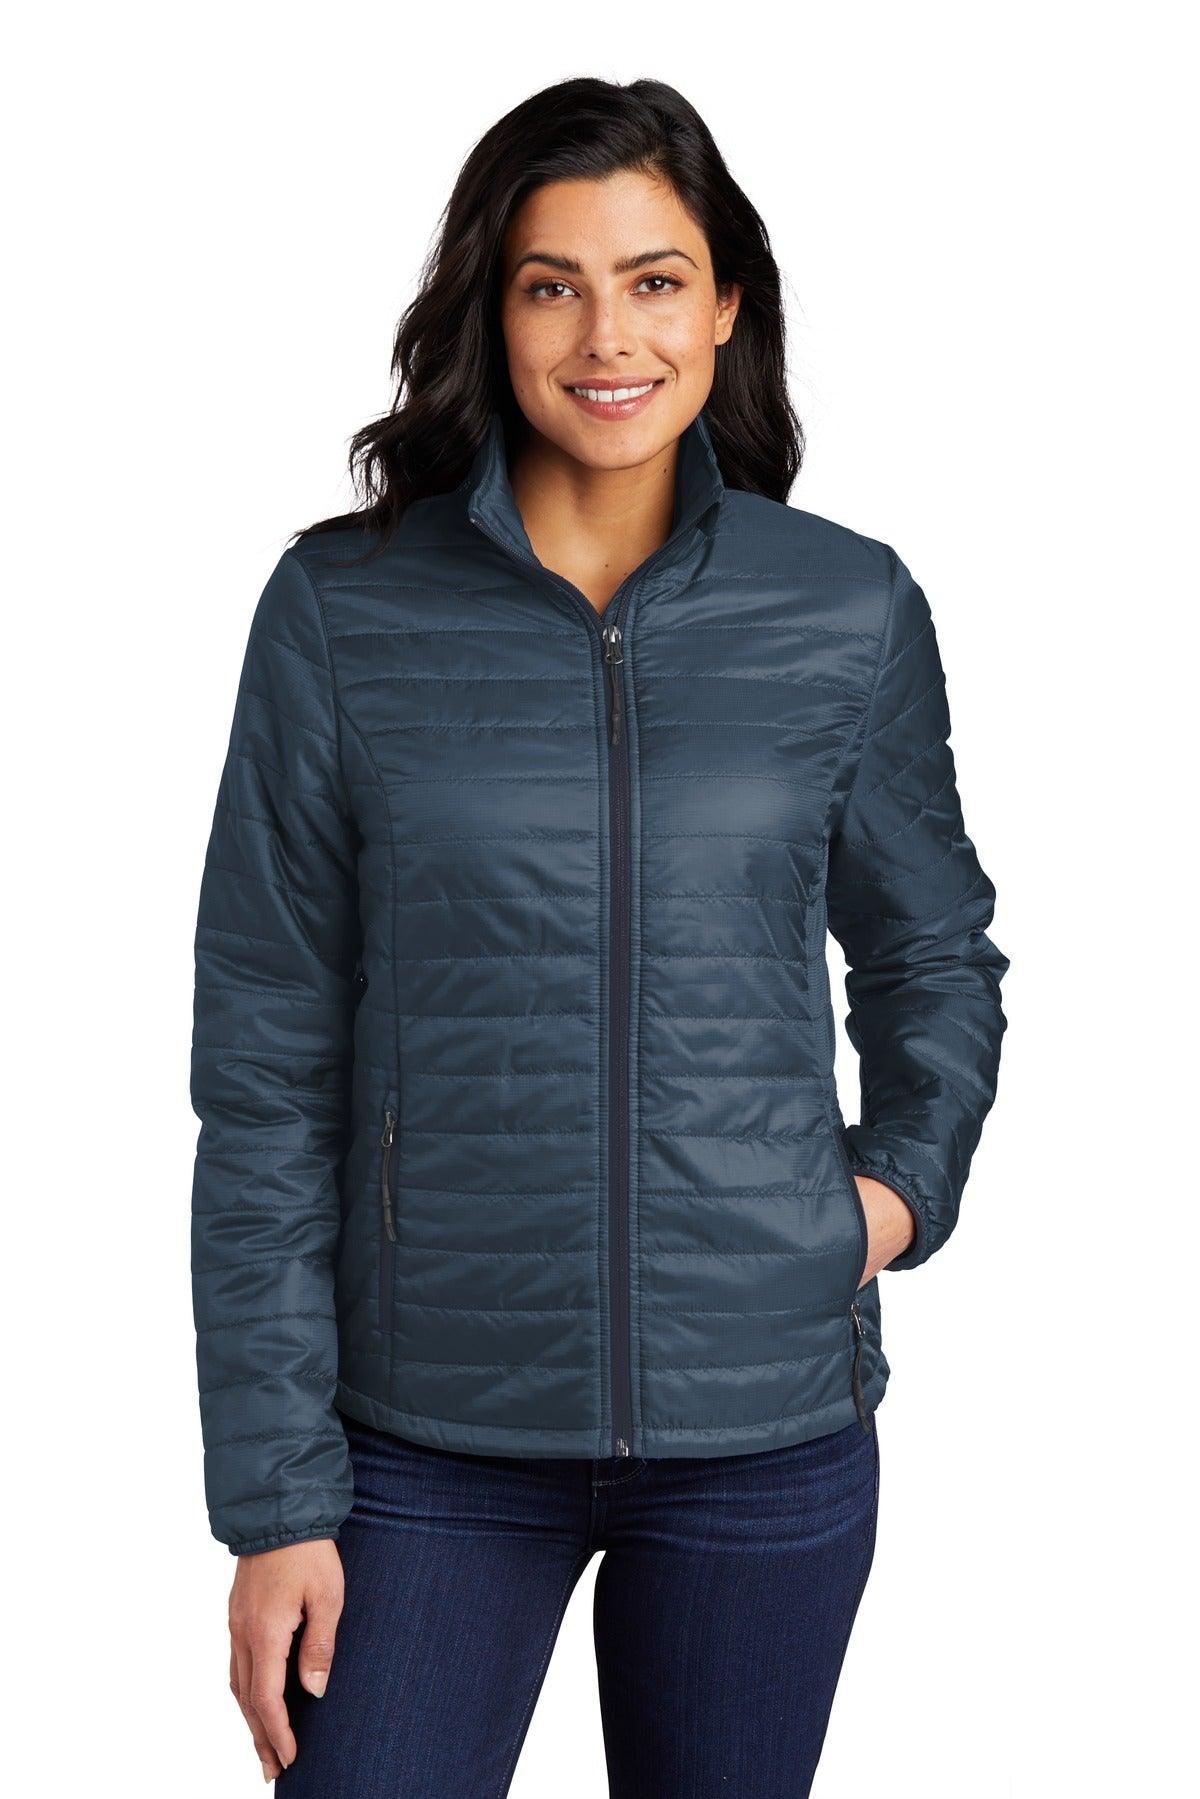 Port Authority Ladies Packable Puffy Jacket L850 - Dresses Max